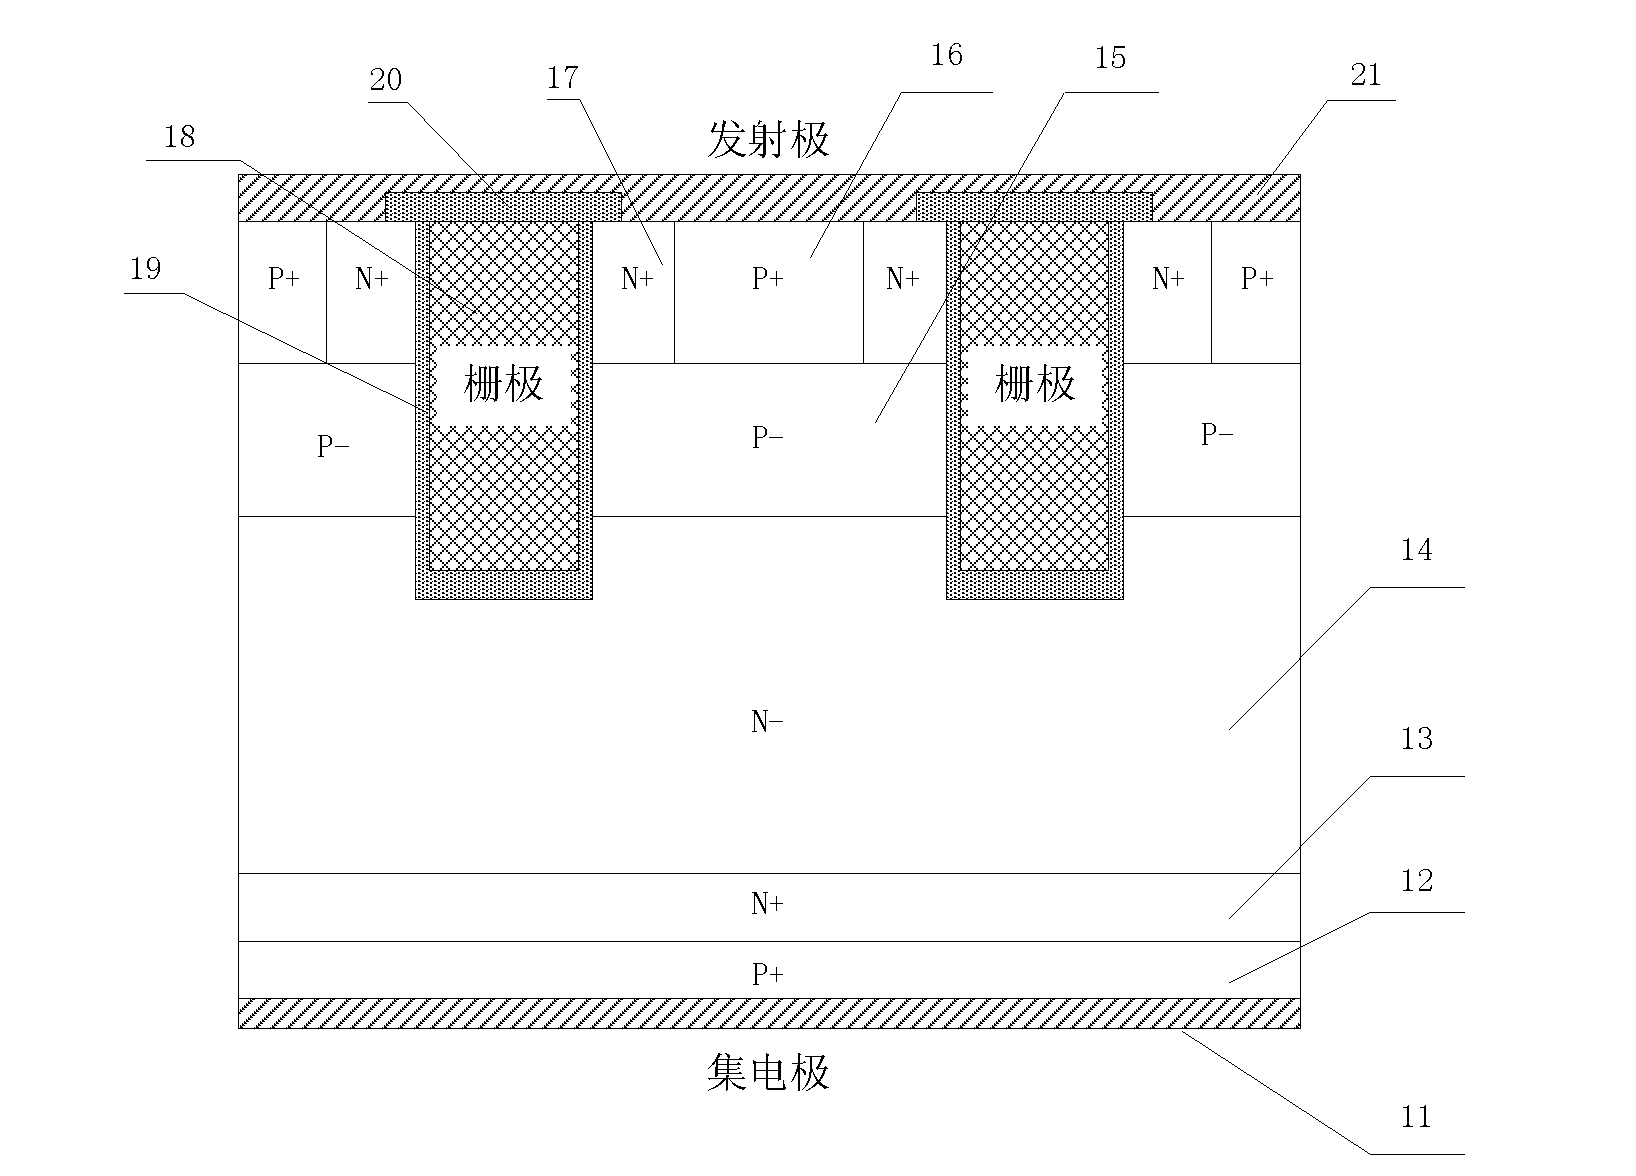 Trench-type insulated gate bipolar transistor (Trench IGBT) with enhanced internal conductivity modulation